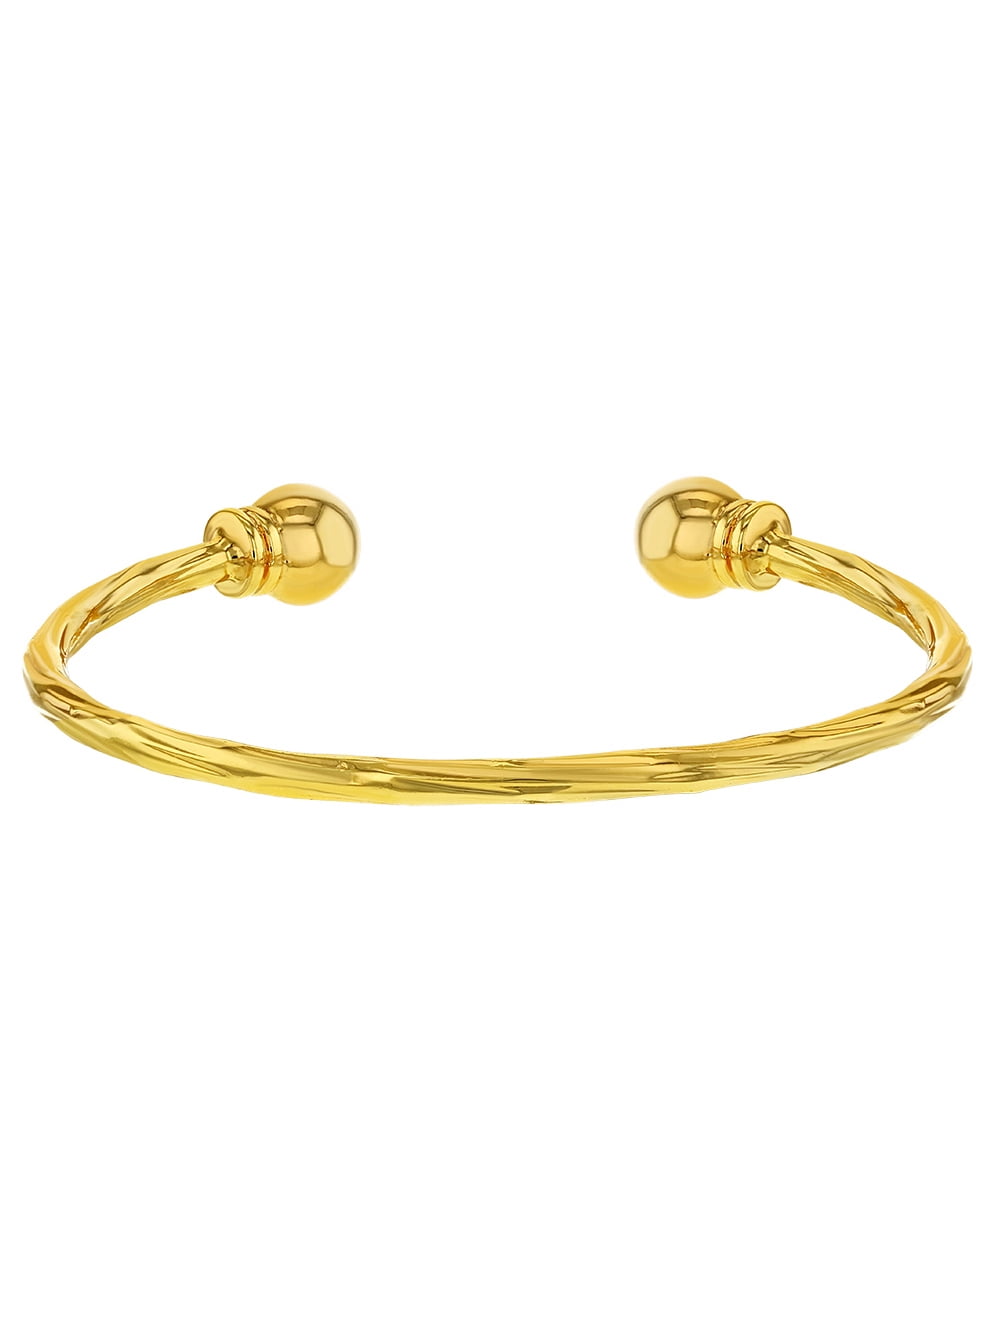 Shiny Yellow Gold Plated Adorable Twisted Cable Cuff Newborn Baby Bracelet  40mm - Walmart.com